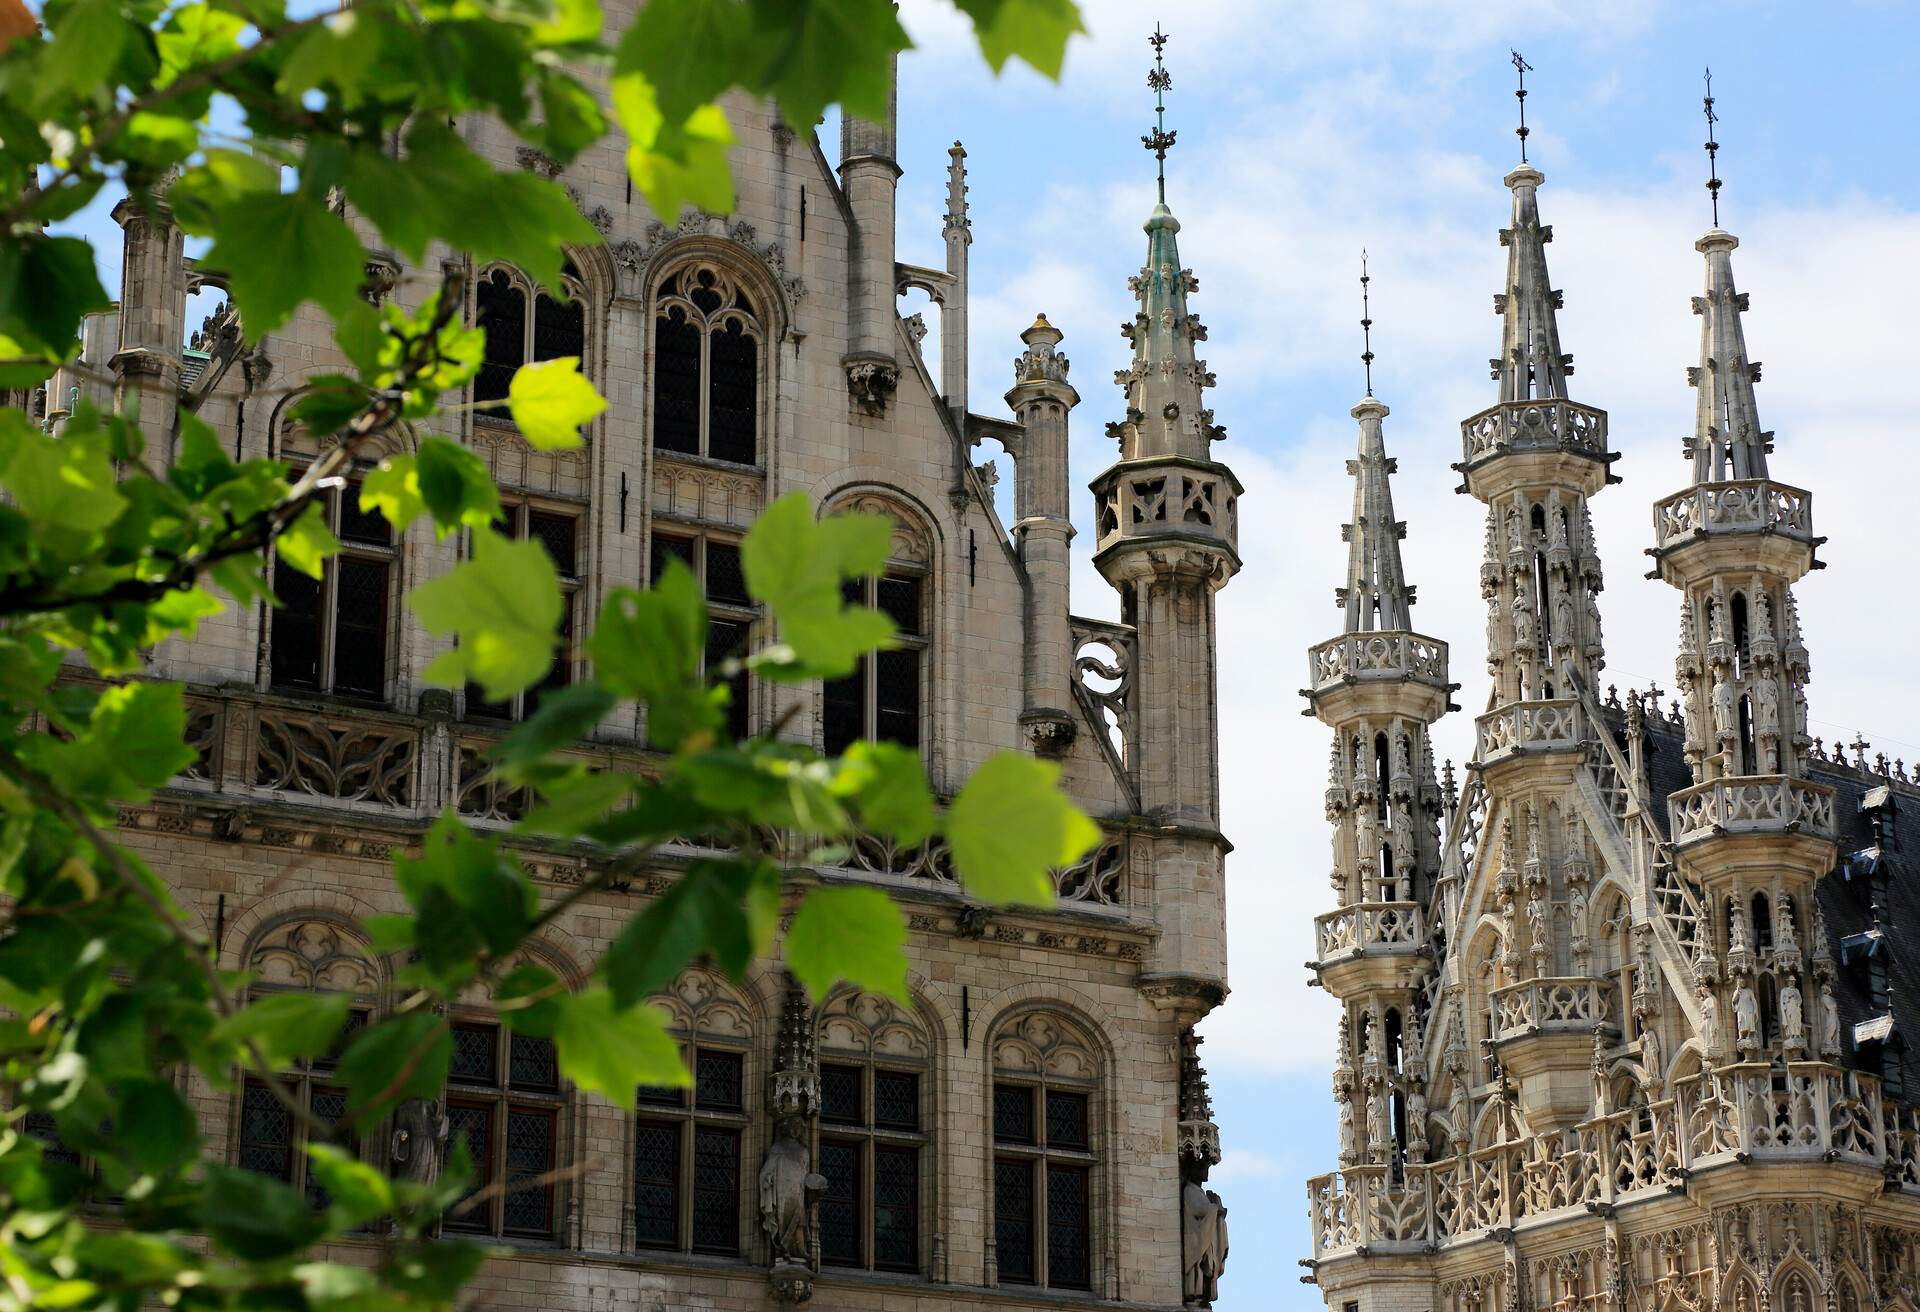 A closed up view of the towers of the 15th century's Brabantine Late Gothic style Town Hall in Market Square (Grote Markt).